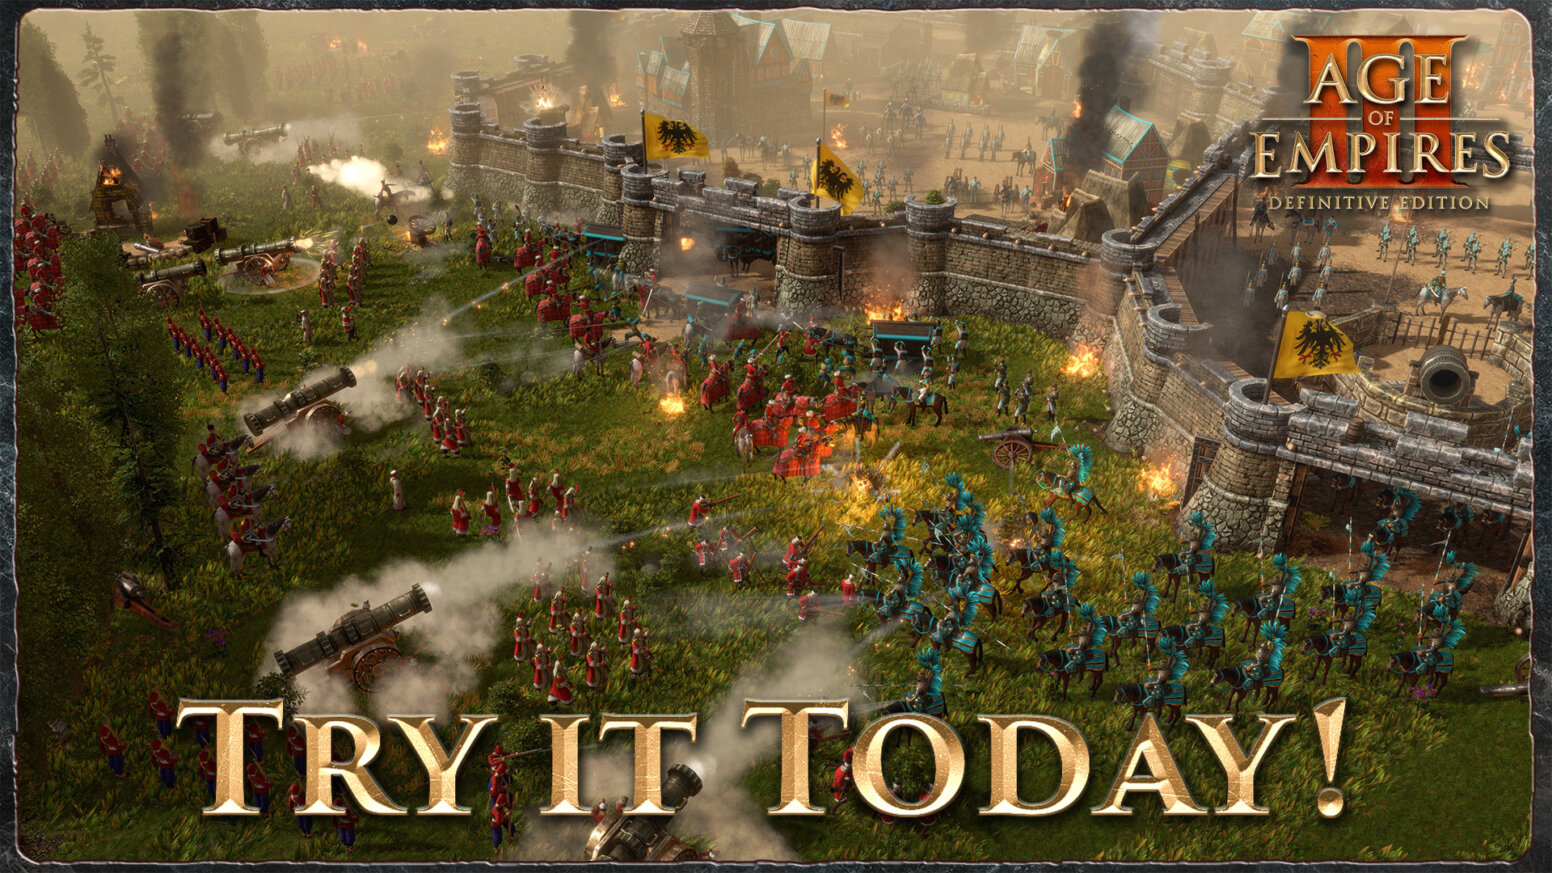 age of empires 2 definitive edition.